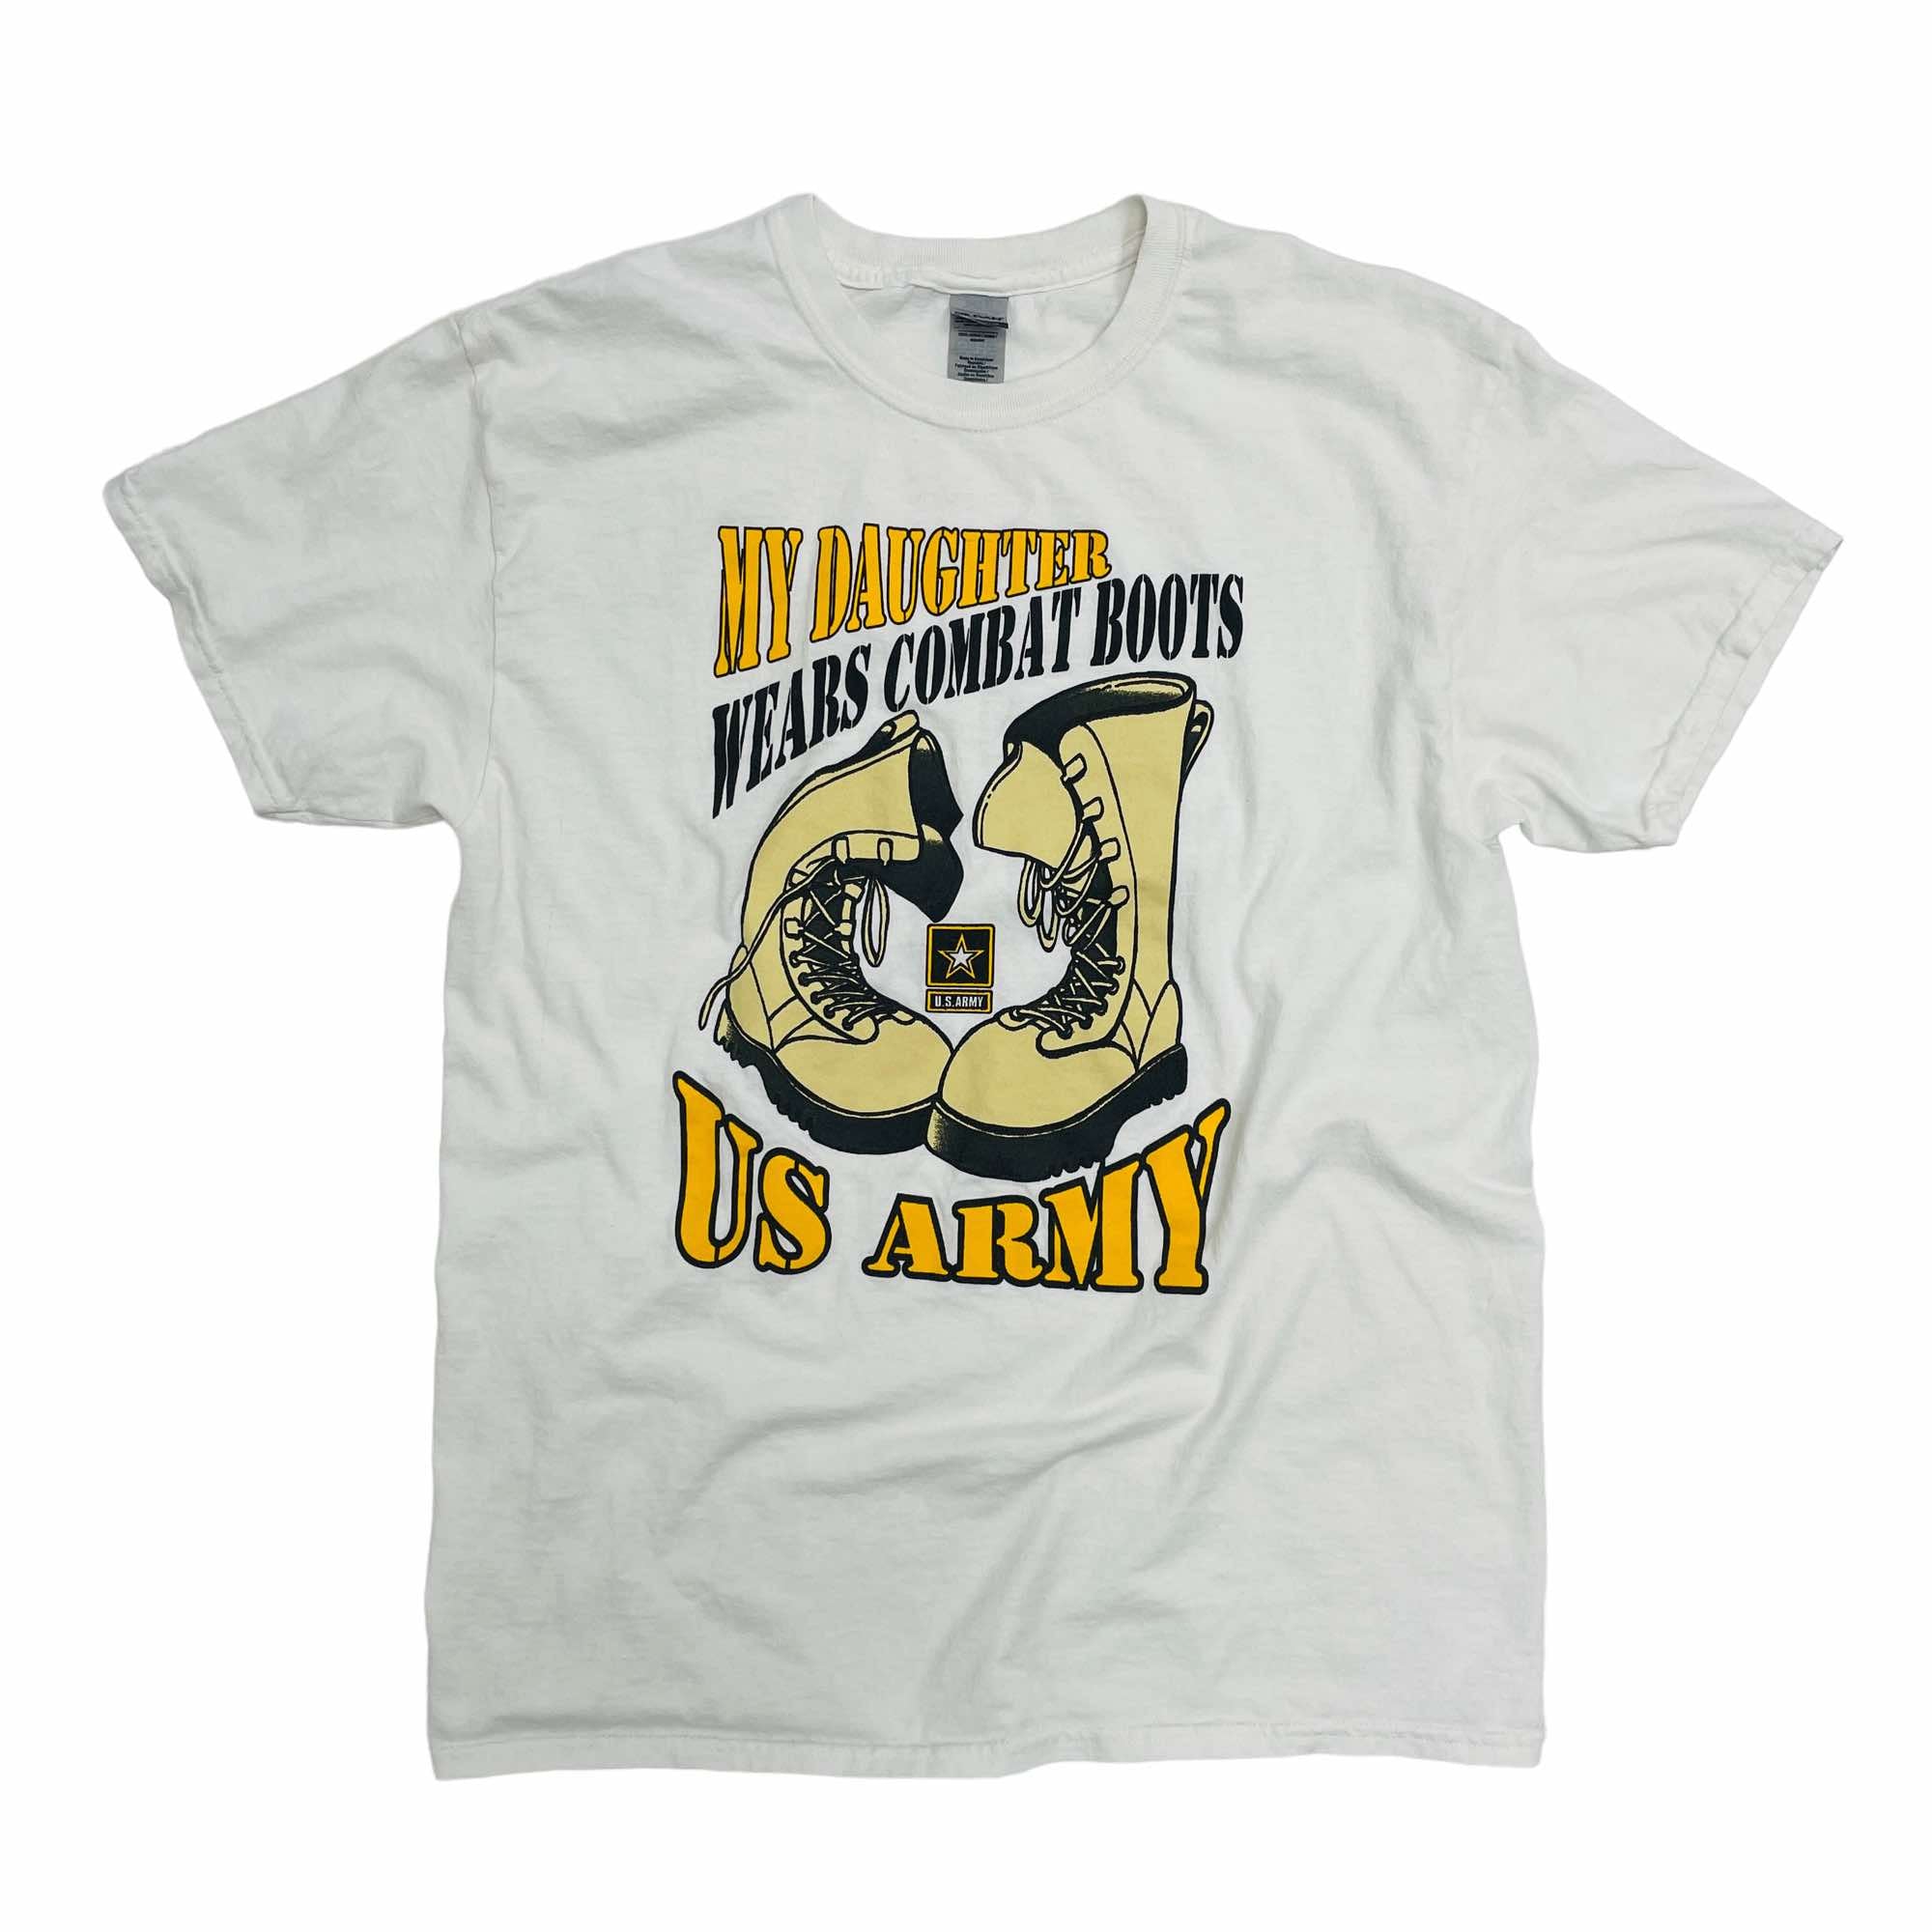 U.S ARMY Graphic T-Shirt- Large